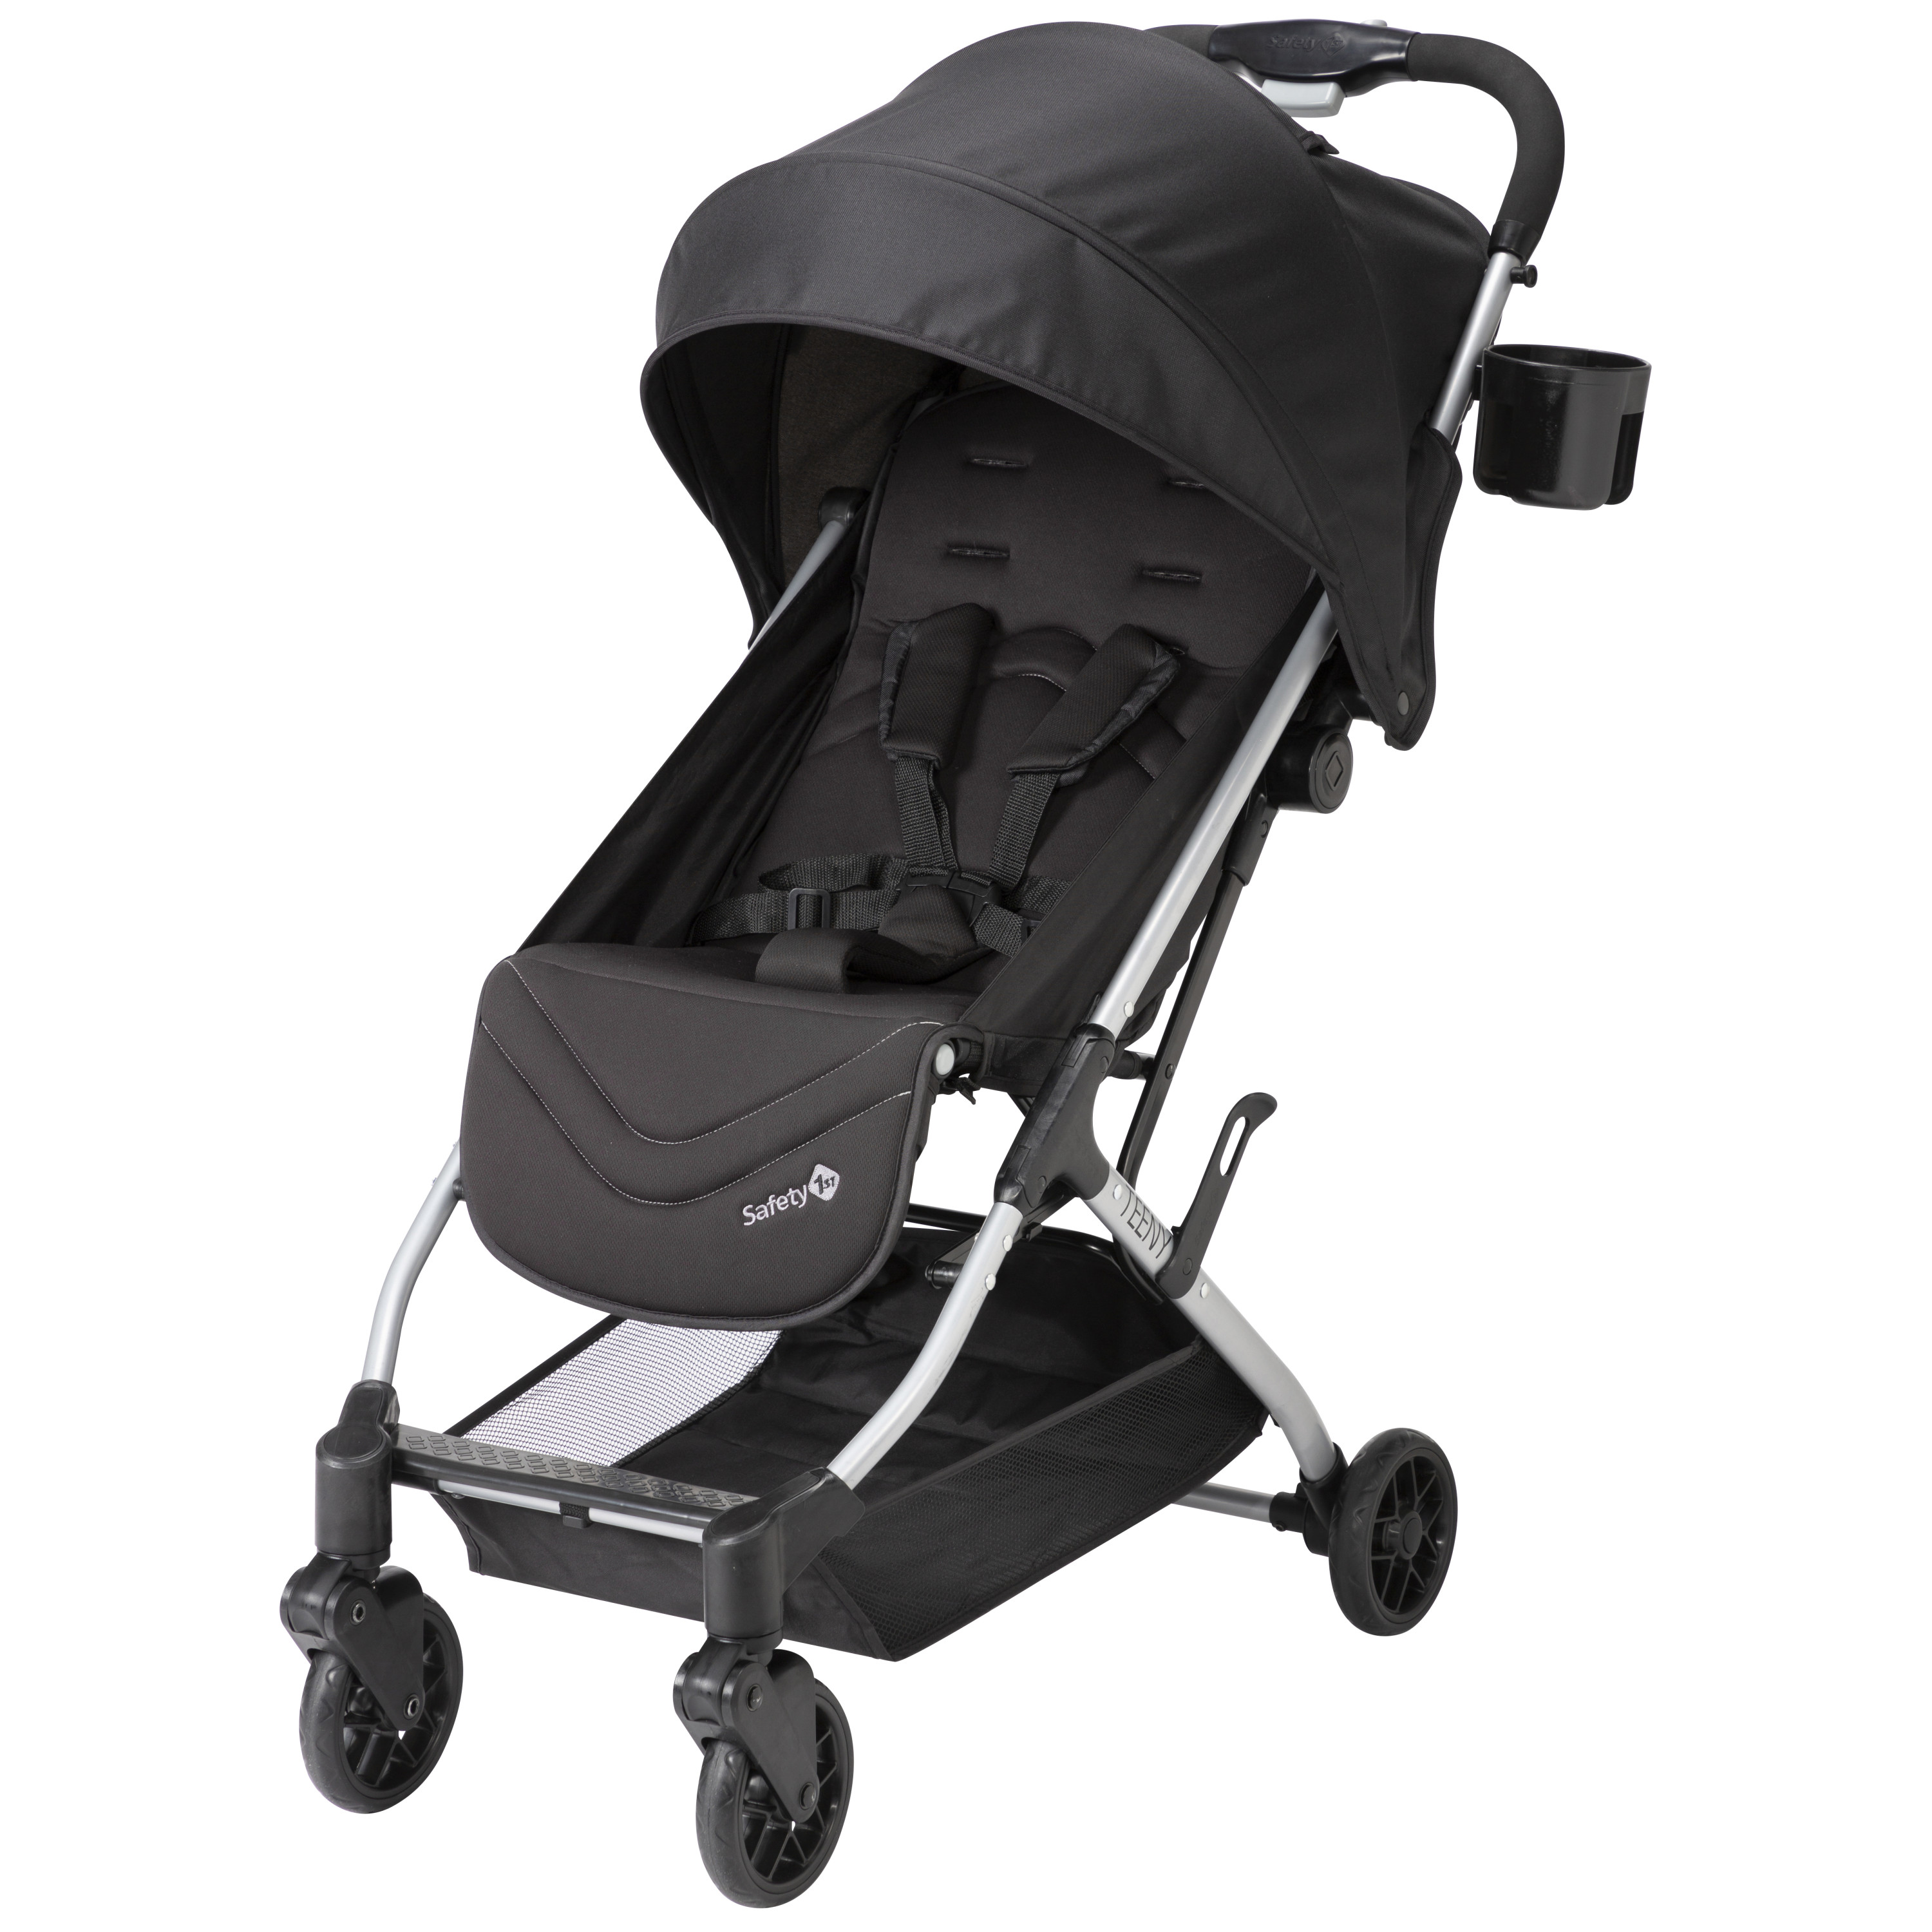 Safety 1ˢᵗ Teeny Ultra Compact Stroller, Black Magic - image 1 of 11